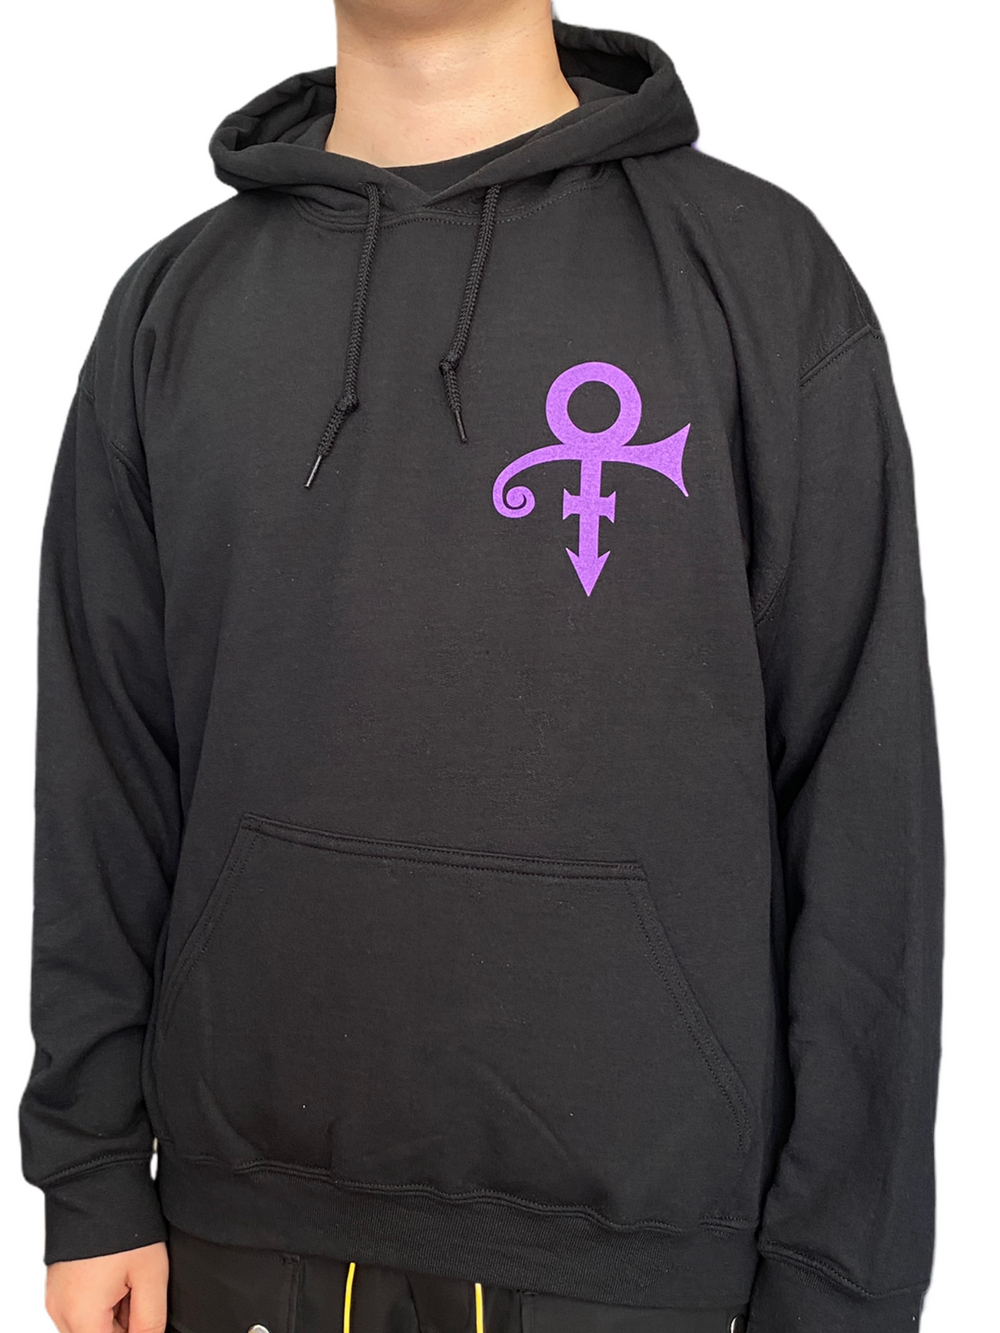 Prince – MPLSound Xclusive Official Unisex Hoodie Front & Back Printed NEW